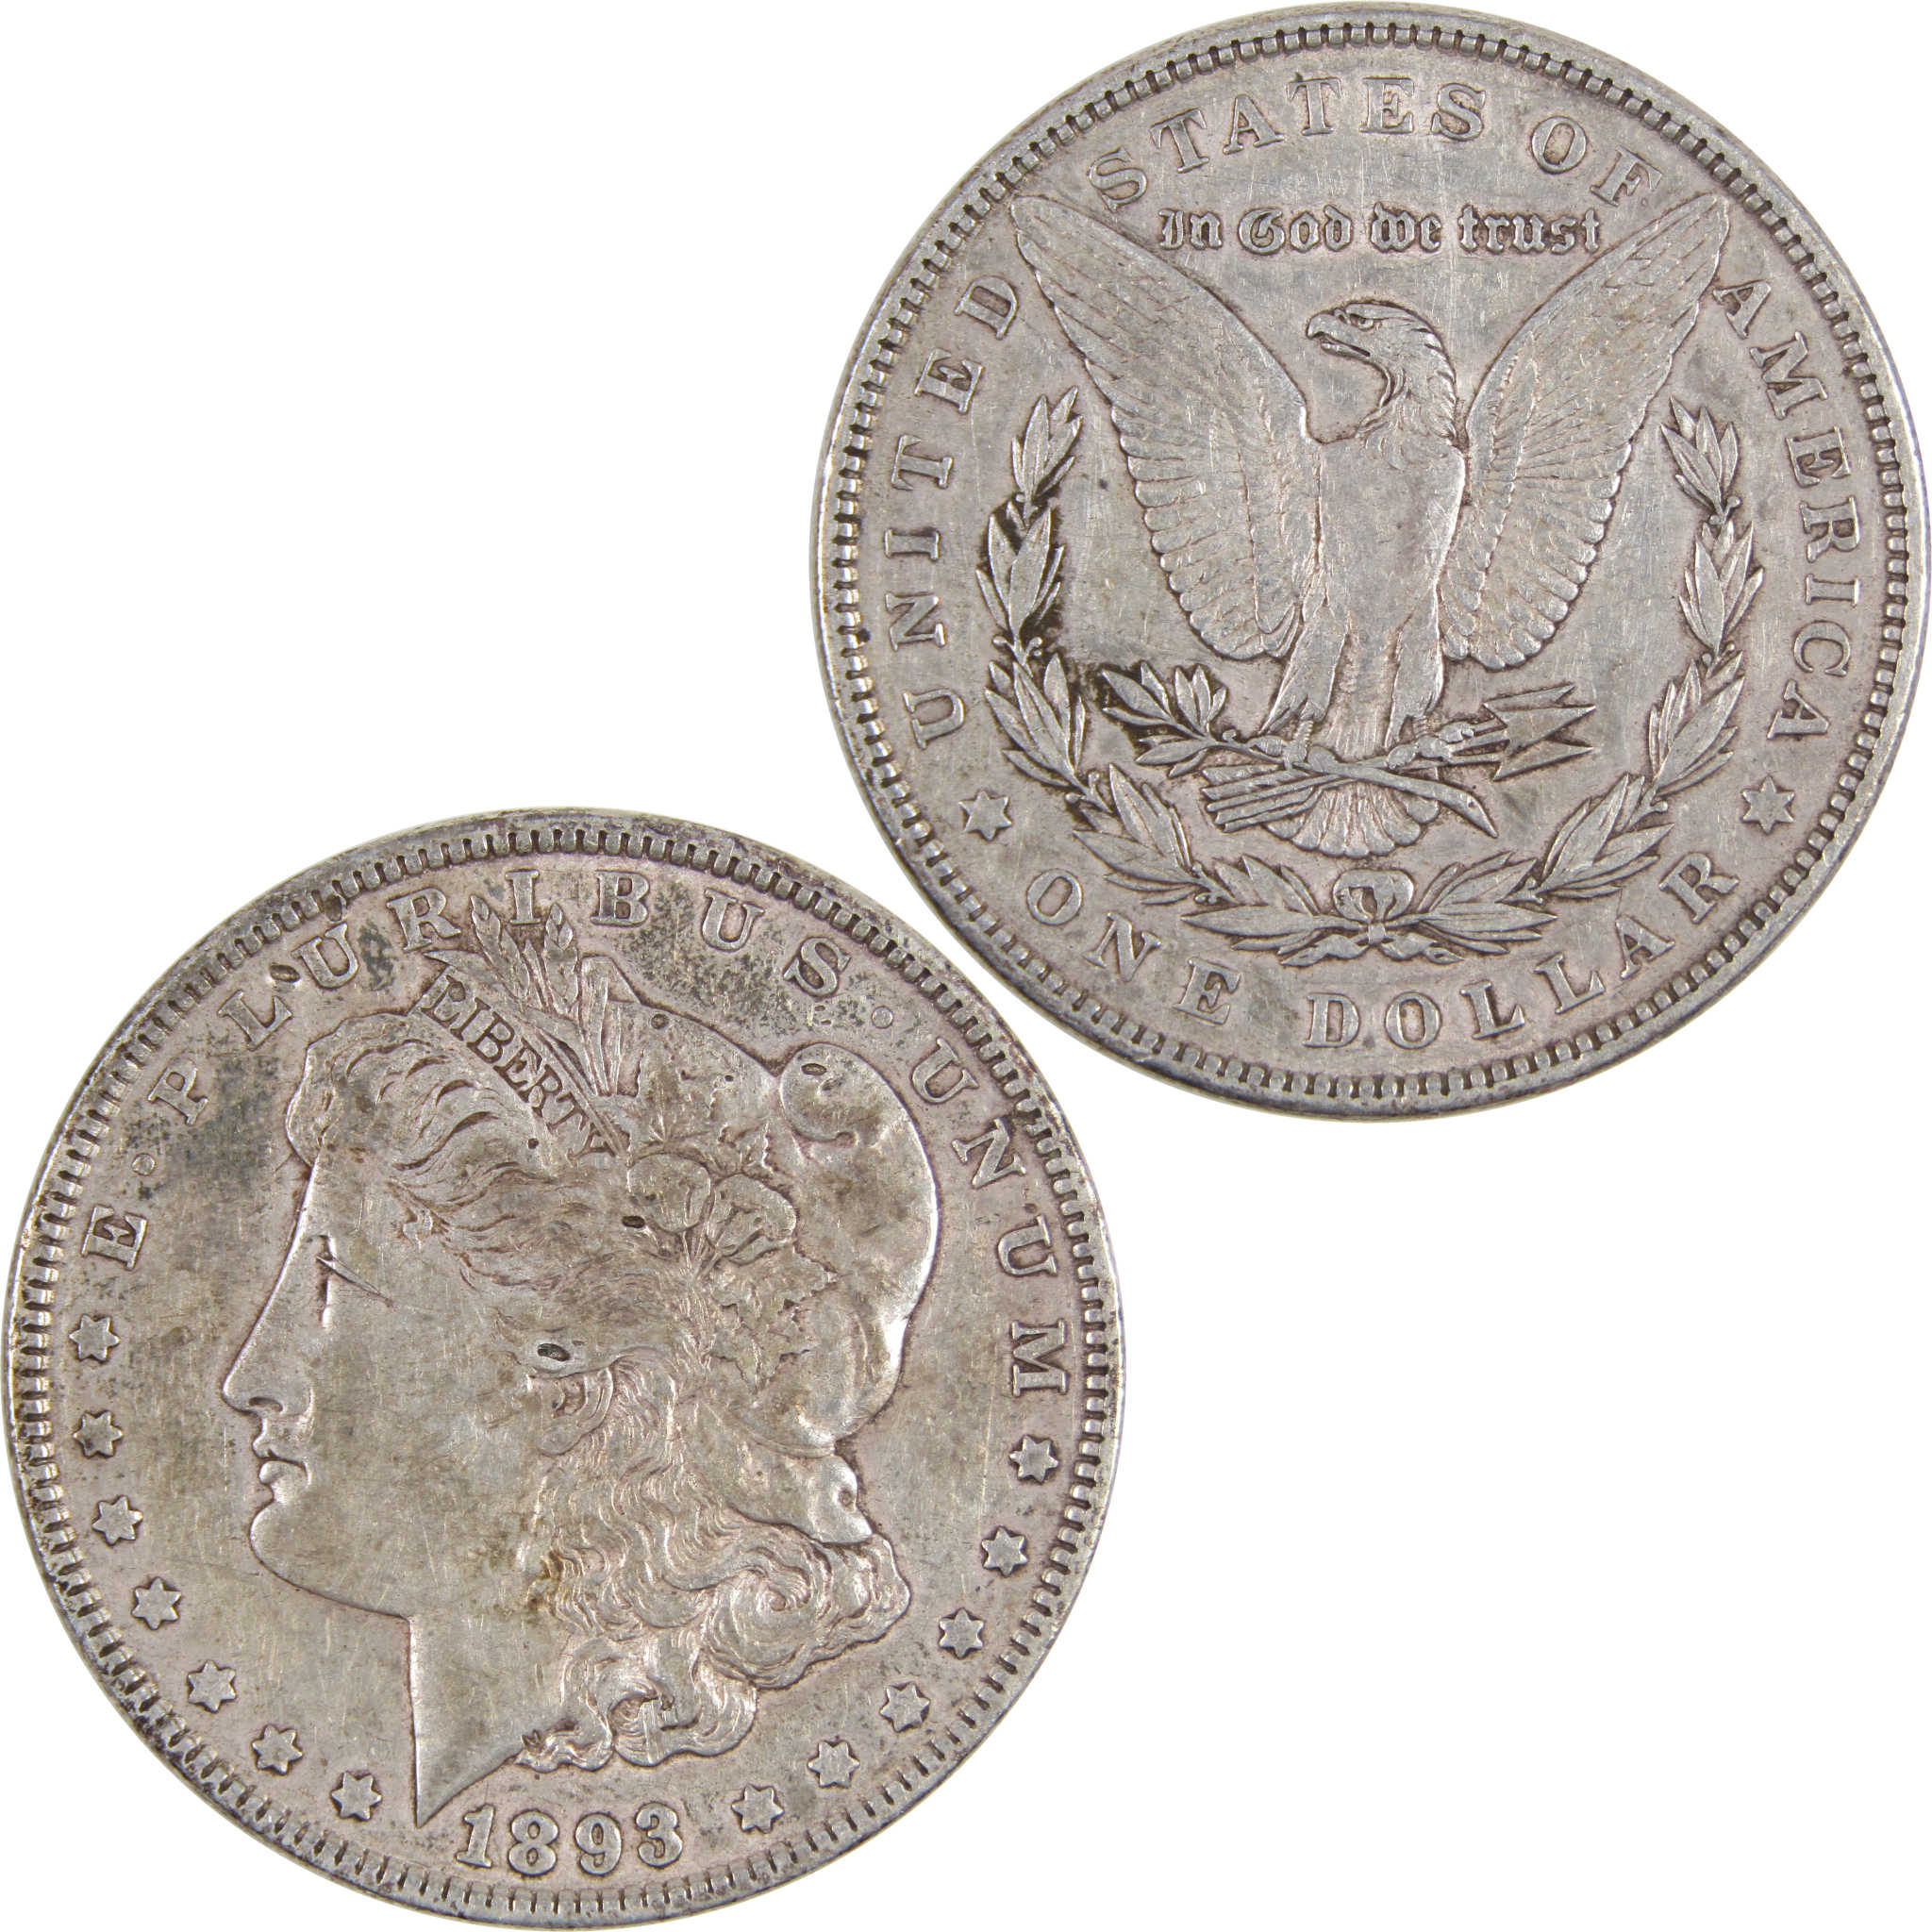 1893 Morgan Dollar XF EF Extremely Fine 90% Silver Coin SKU:I2860 - Morgan coin - Morgan silver dollar - Morgan silver dollar for sale - Profile Coins &amp; Collectibles